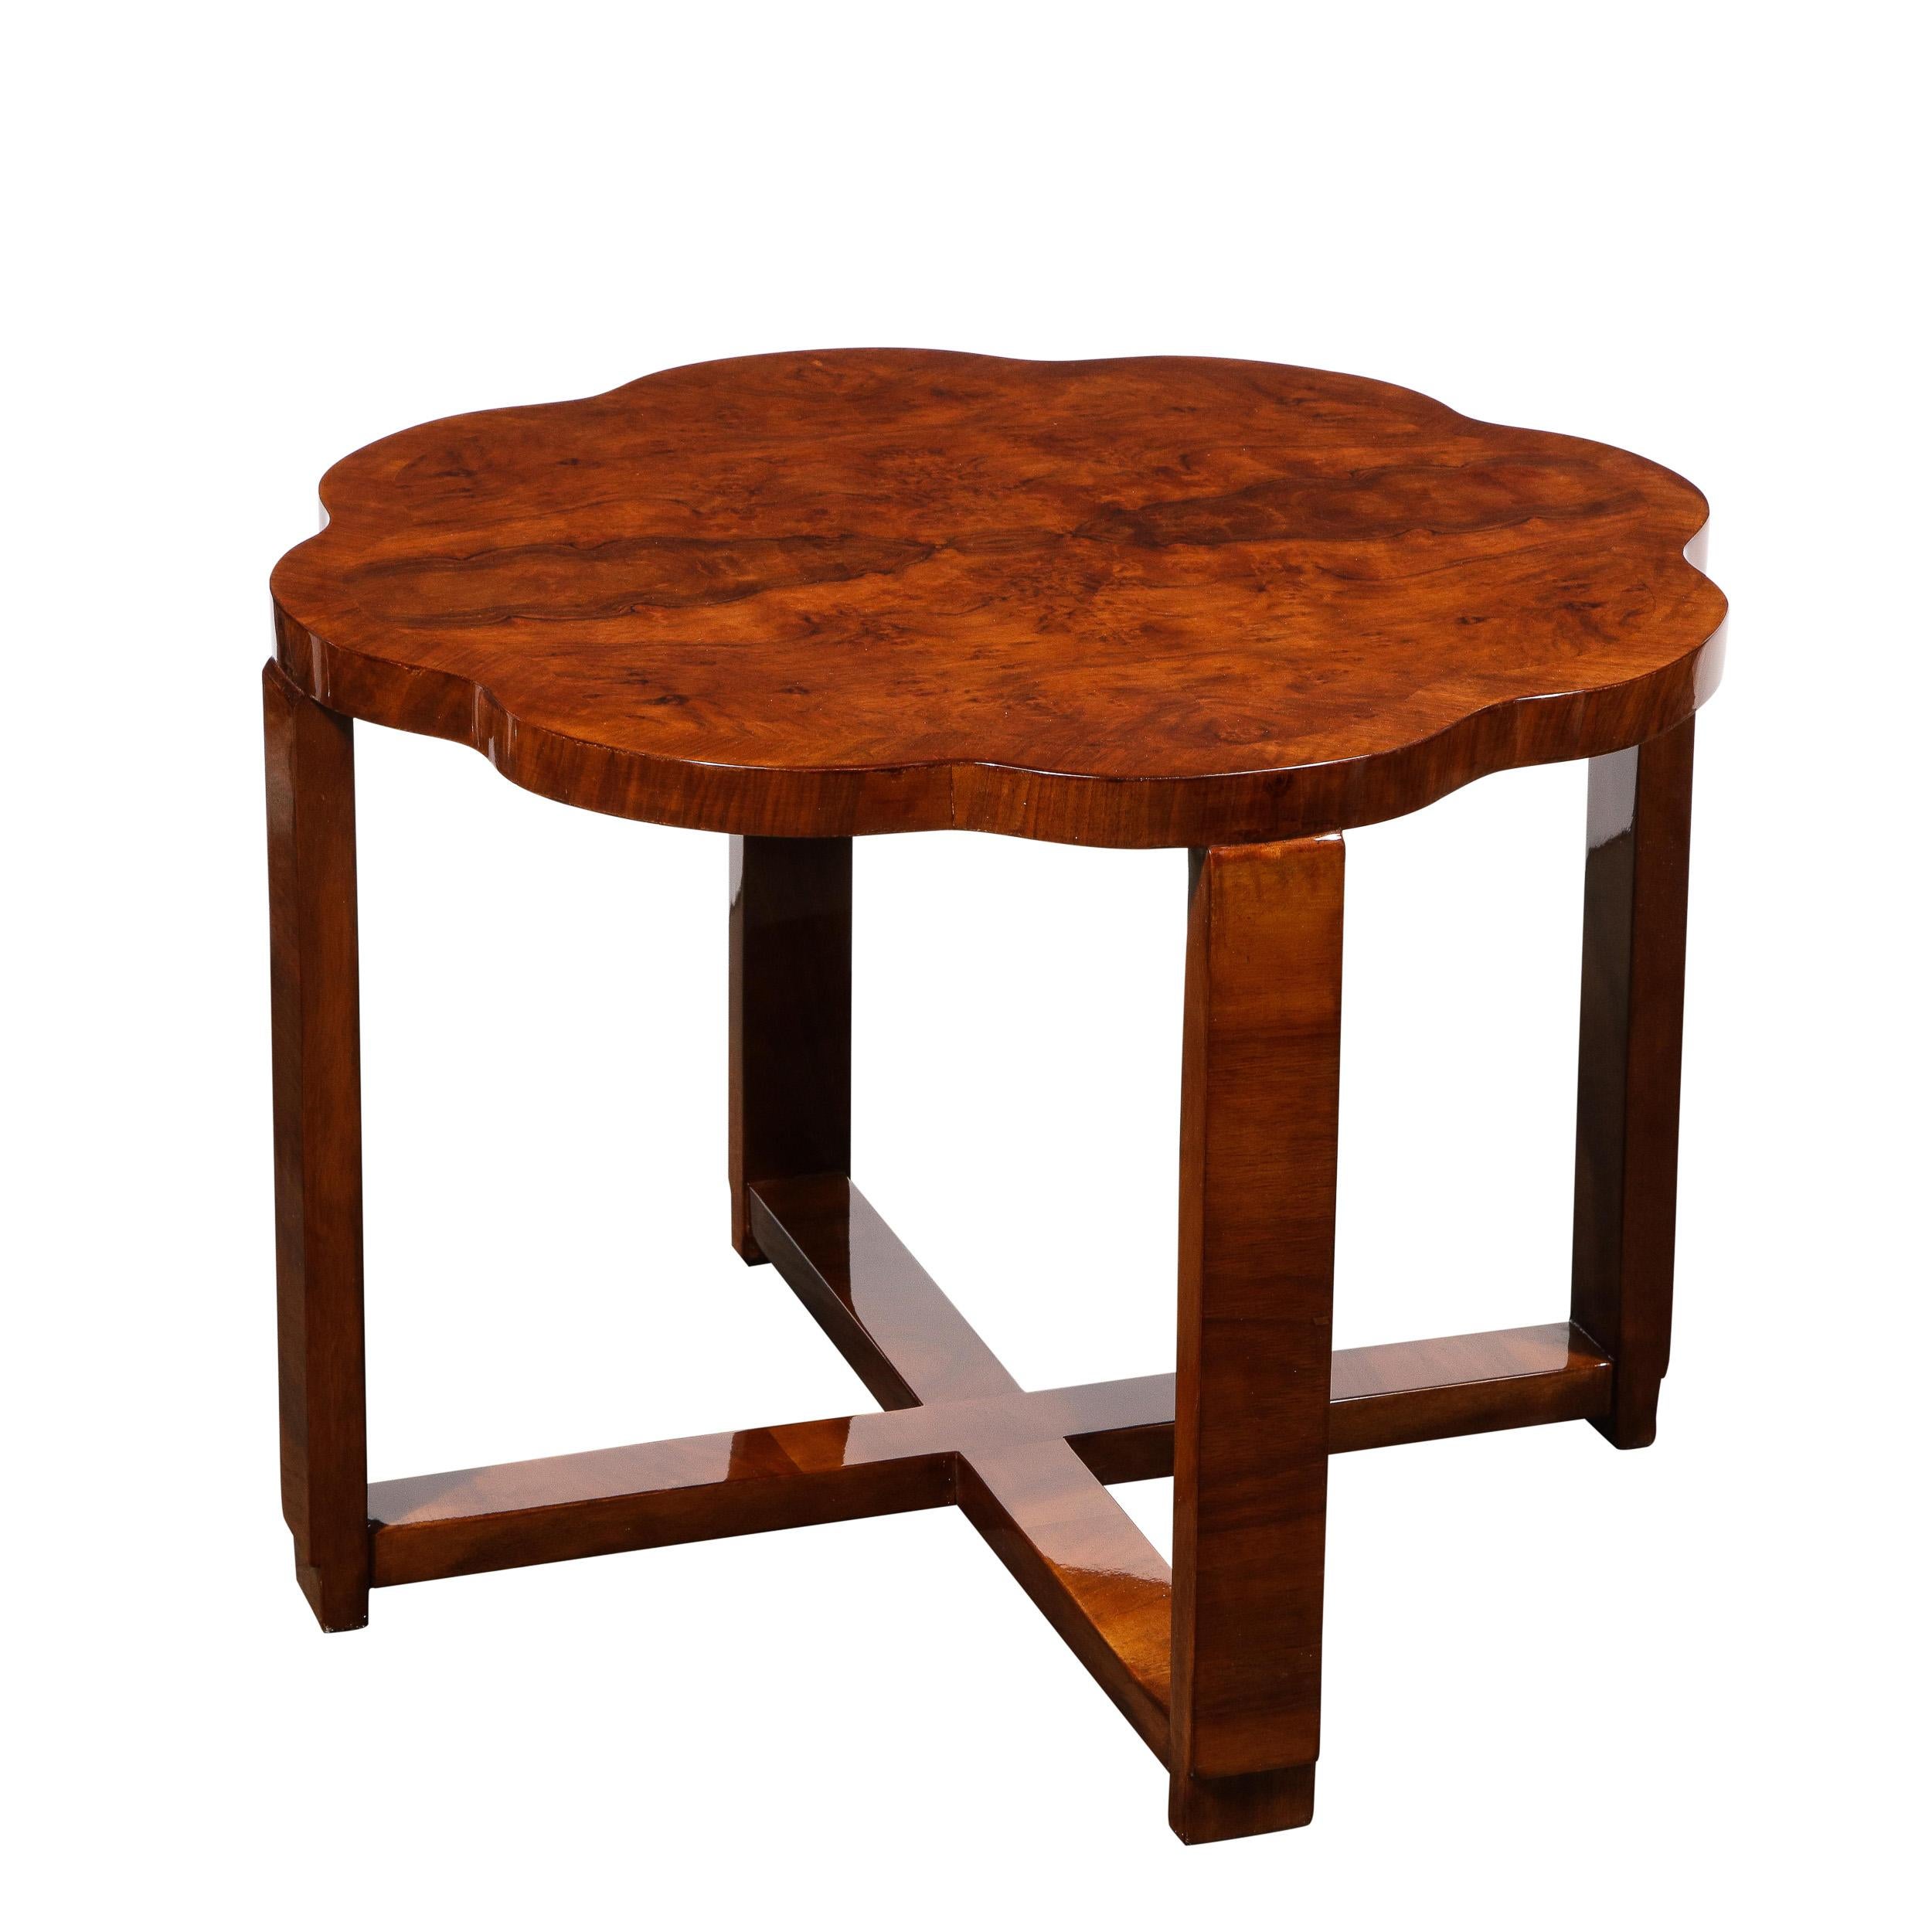 This elegant Art Deco table was realized in France, circa 1930. It offers a scalloped 